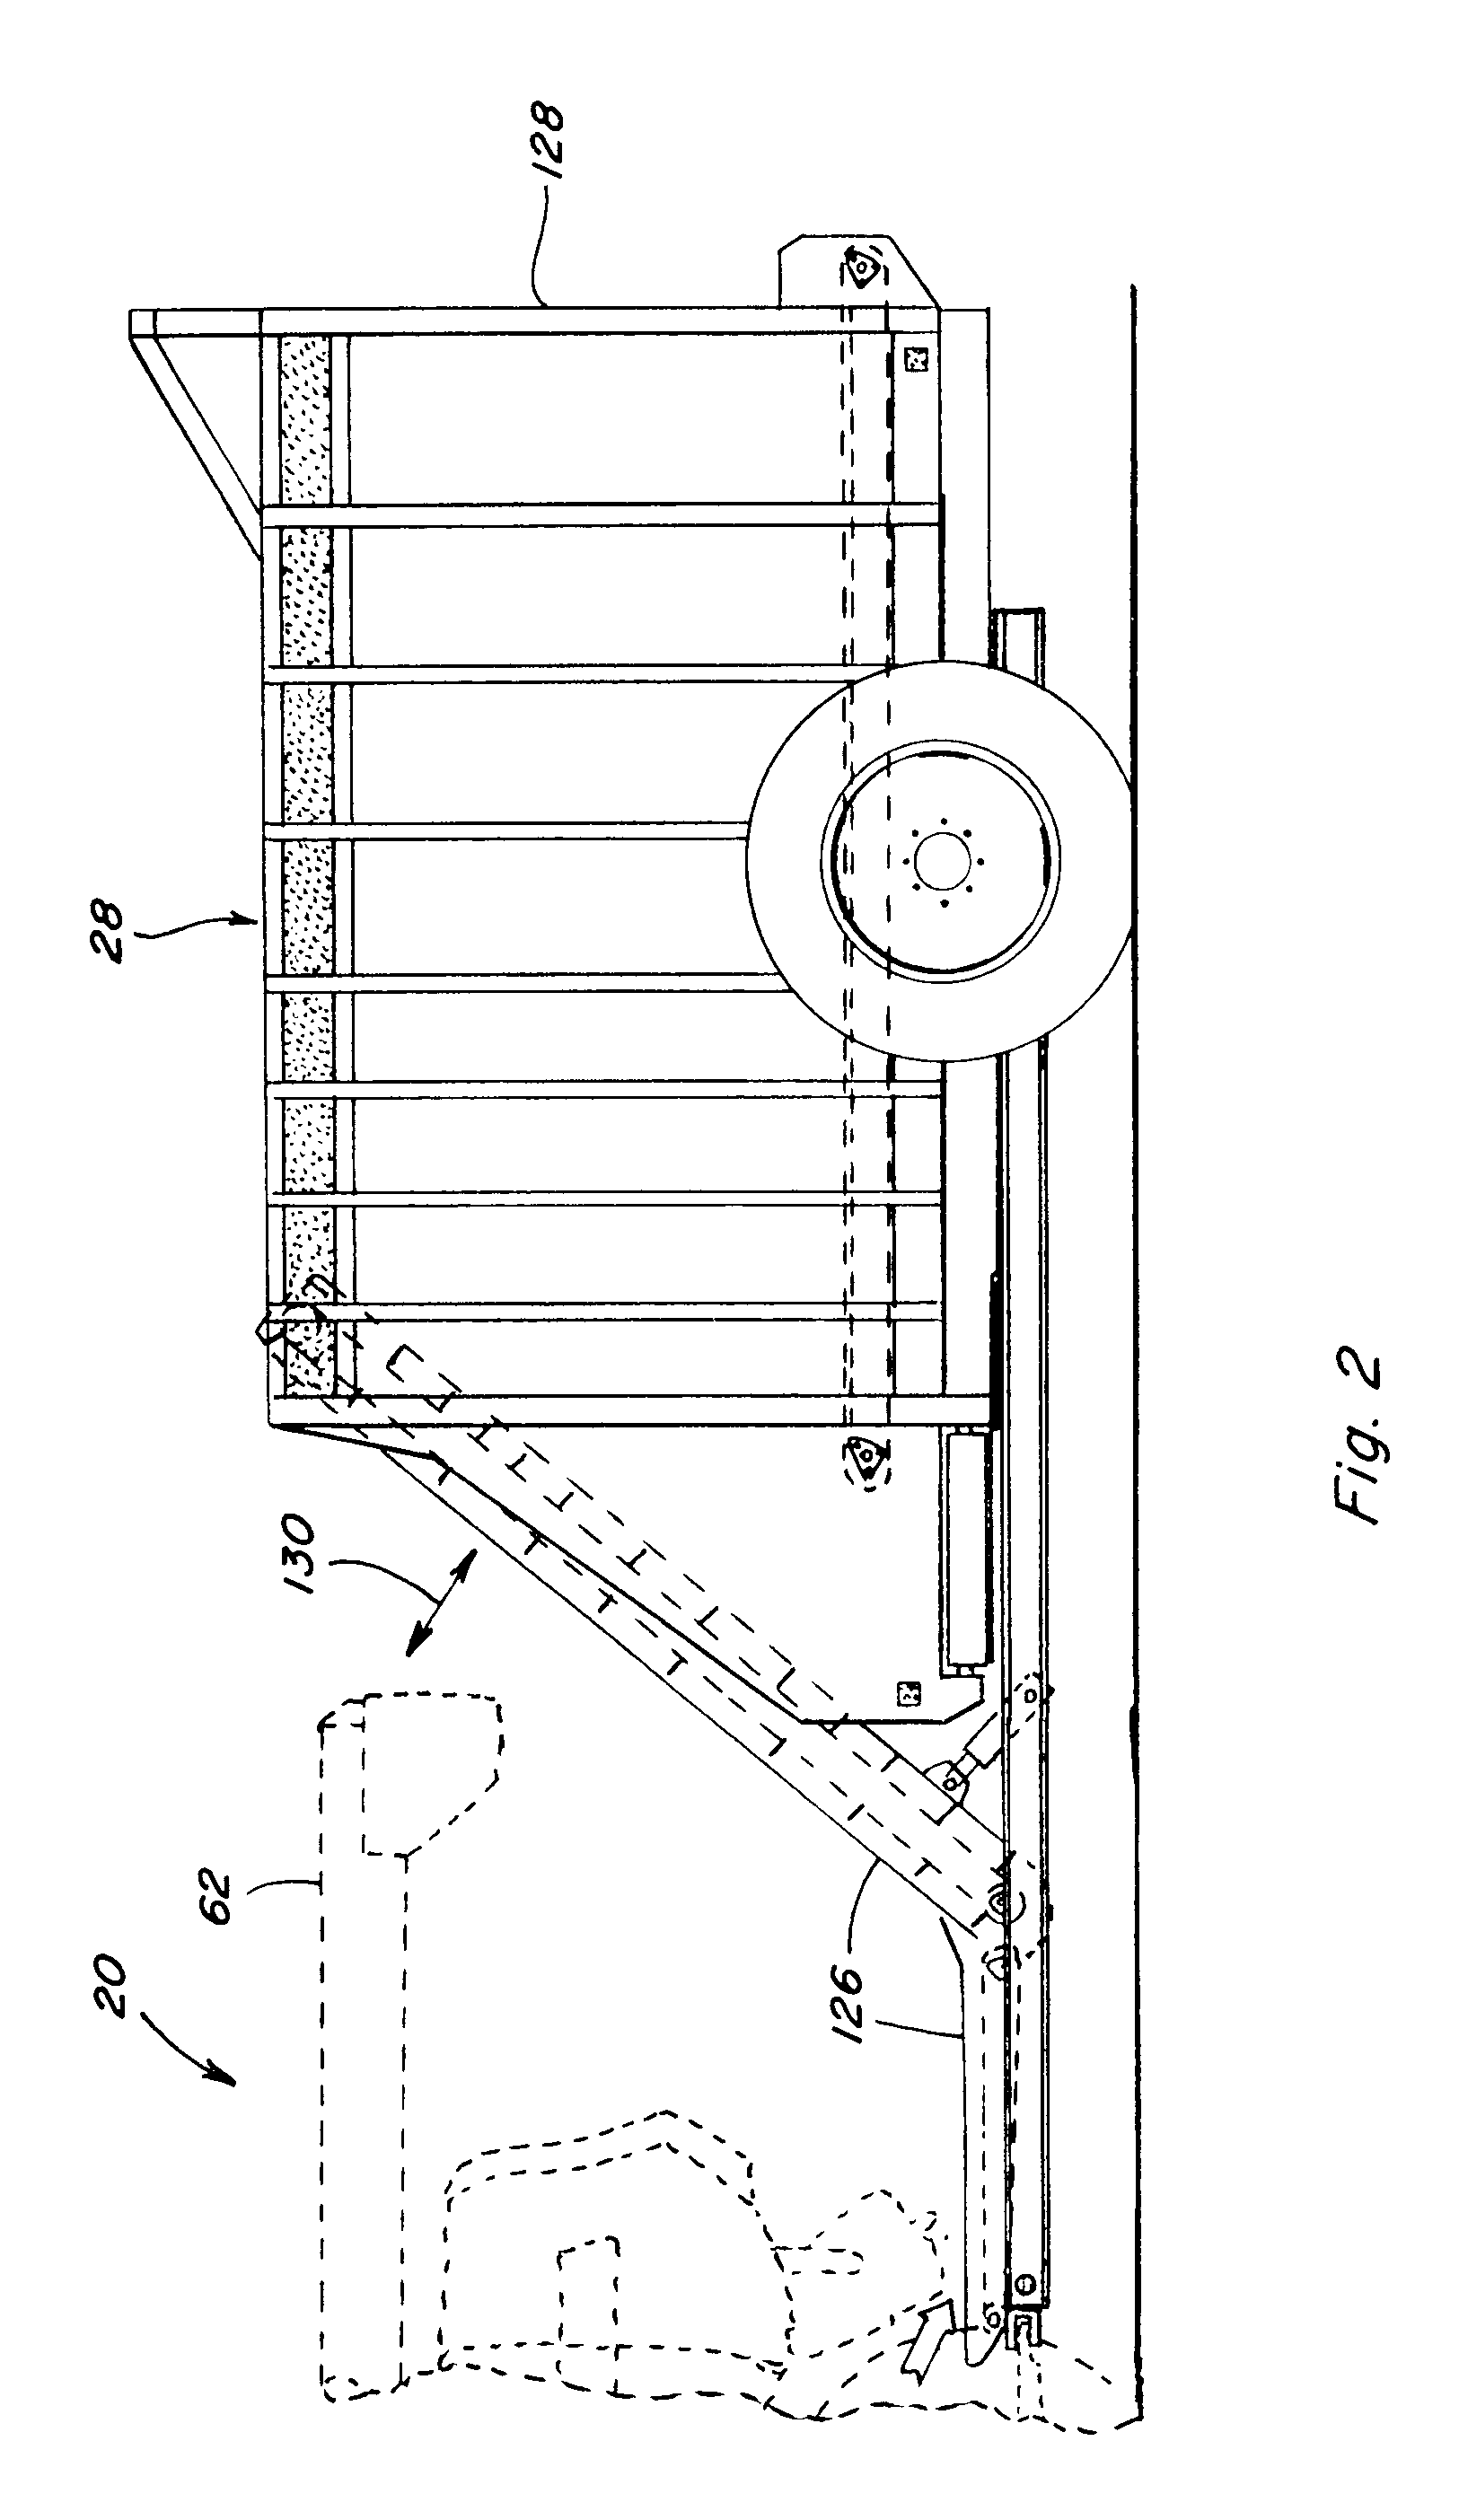 Agricultural combine with internal cob de-husking apparatus and system